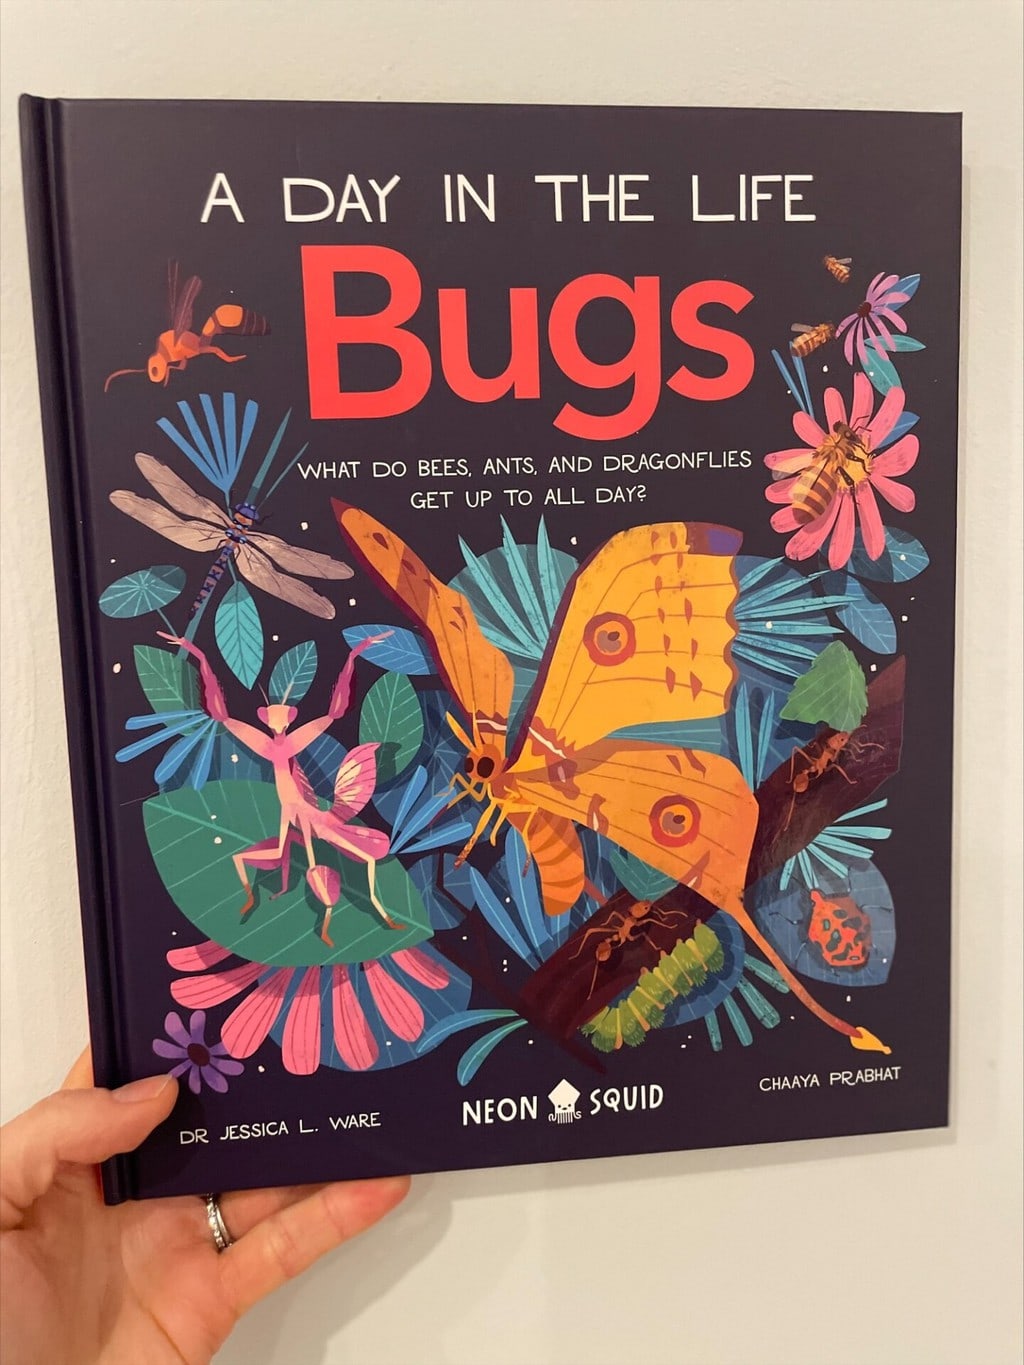 A Day in the Life of Bugs – Dr Jessica L. Ware